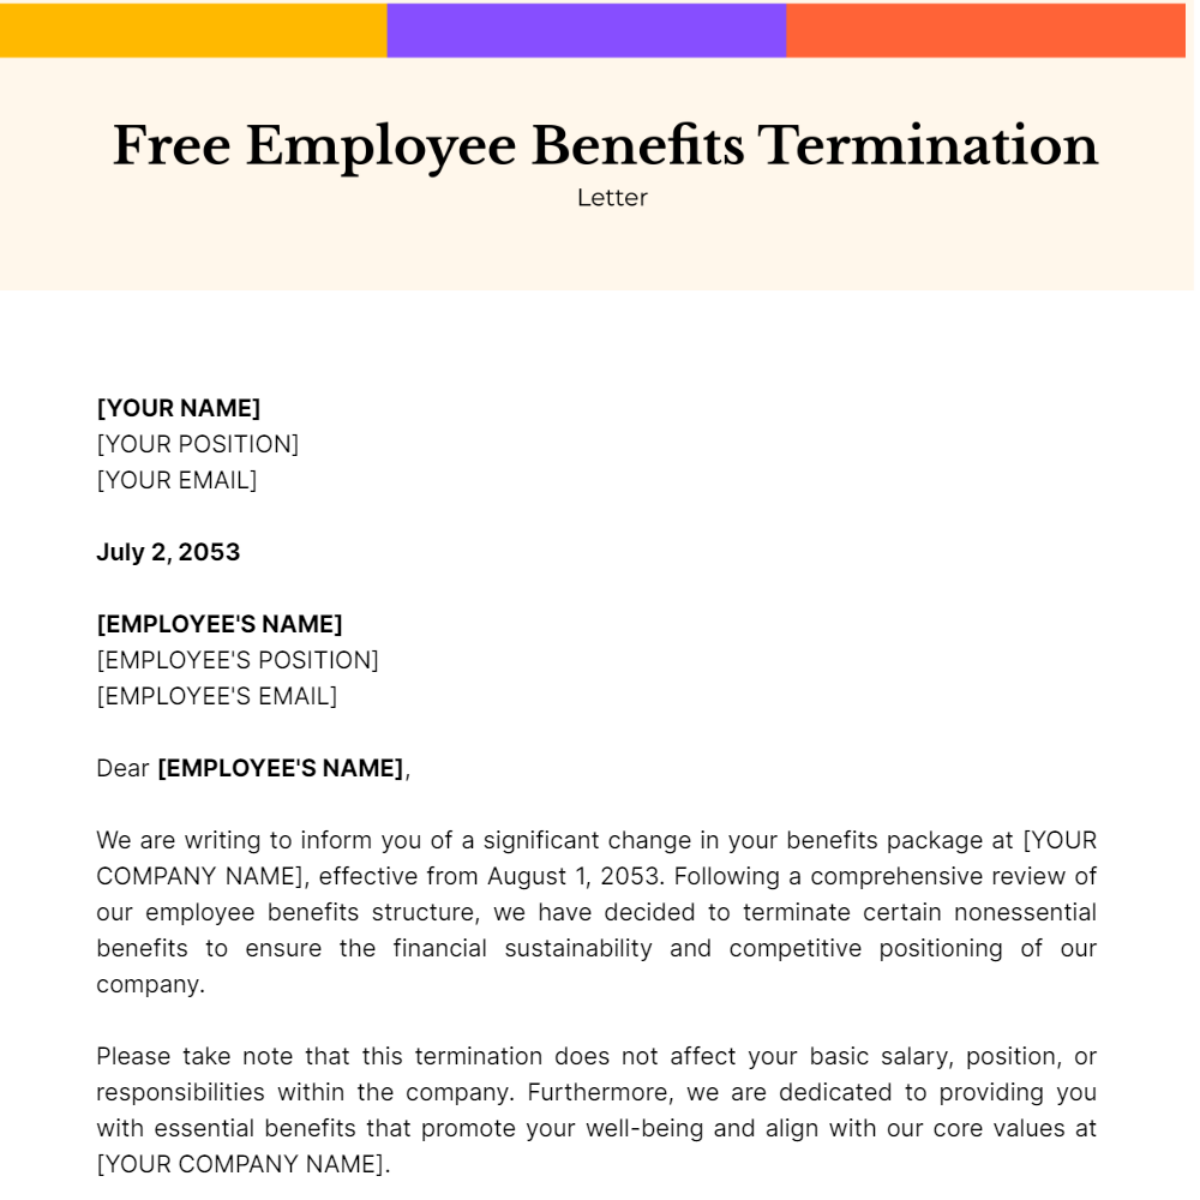 Employee Benefits Termination Letter Template